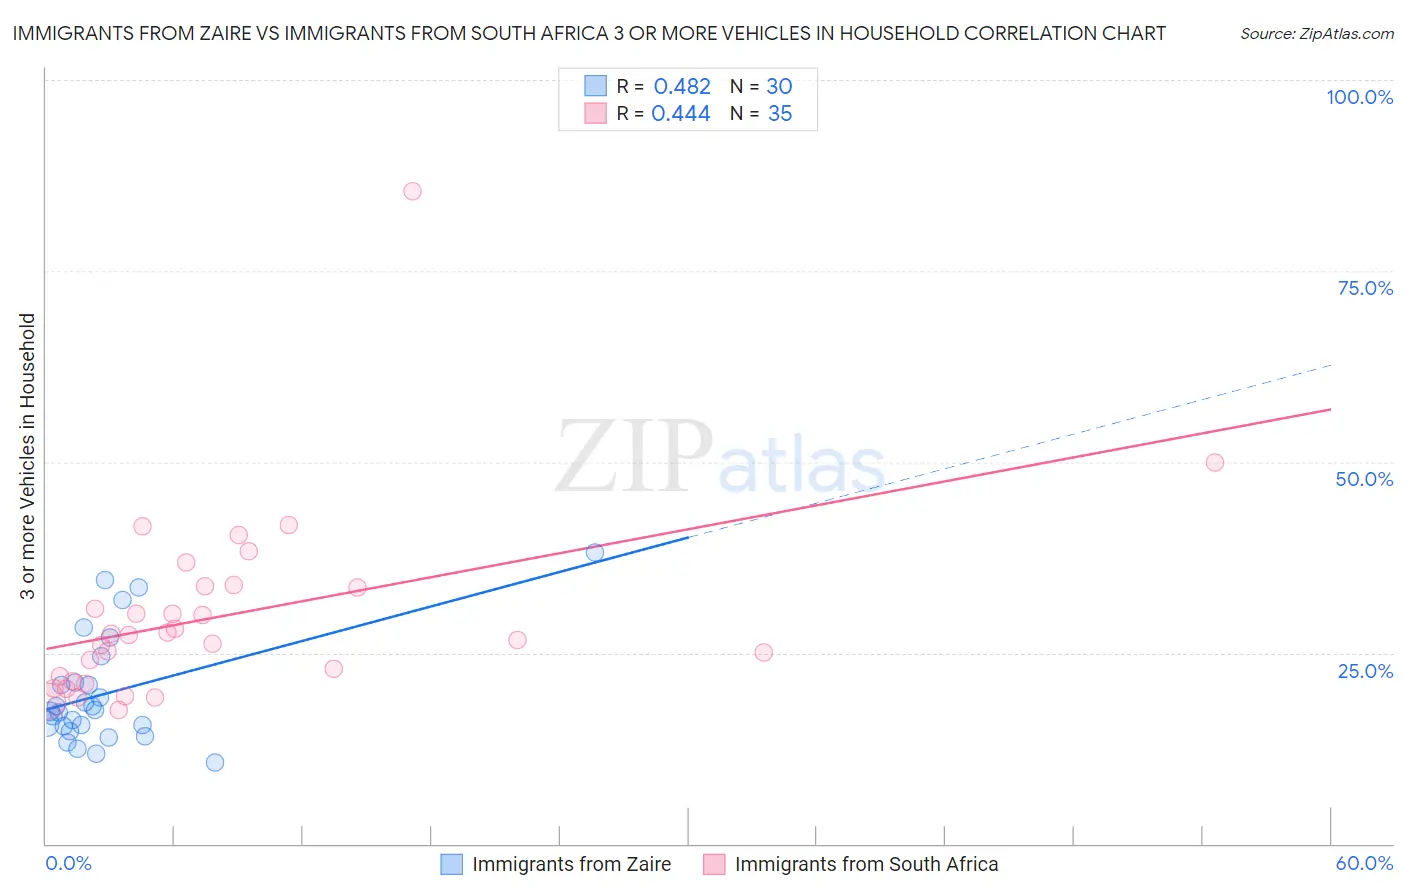 Immigrants from Zaire vs Immigrants from South Africa 3 or more Vehicles in Household